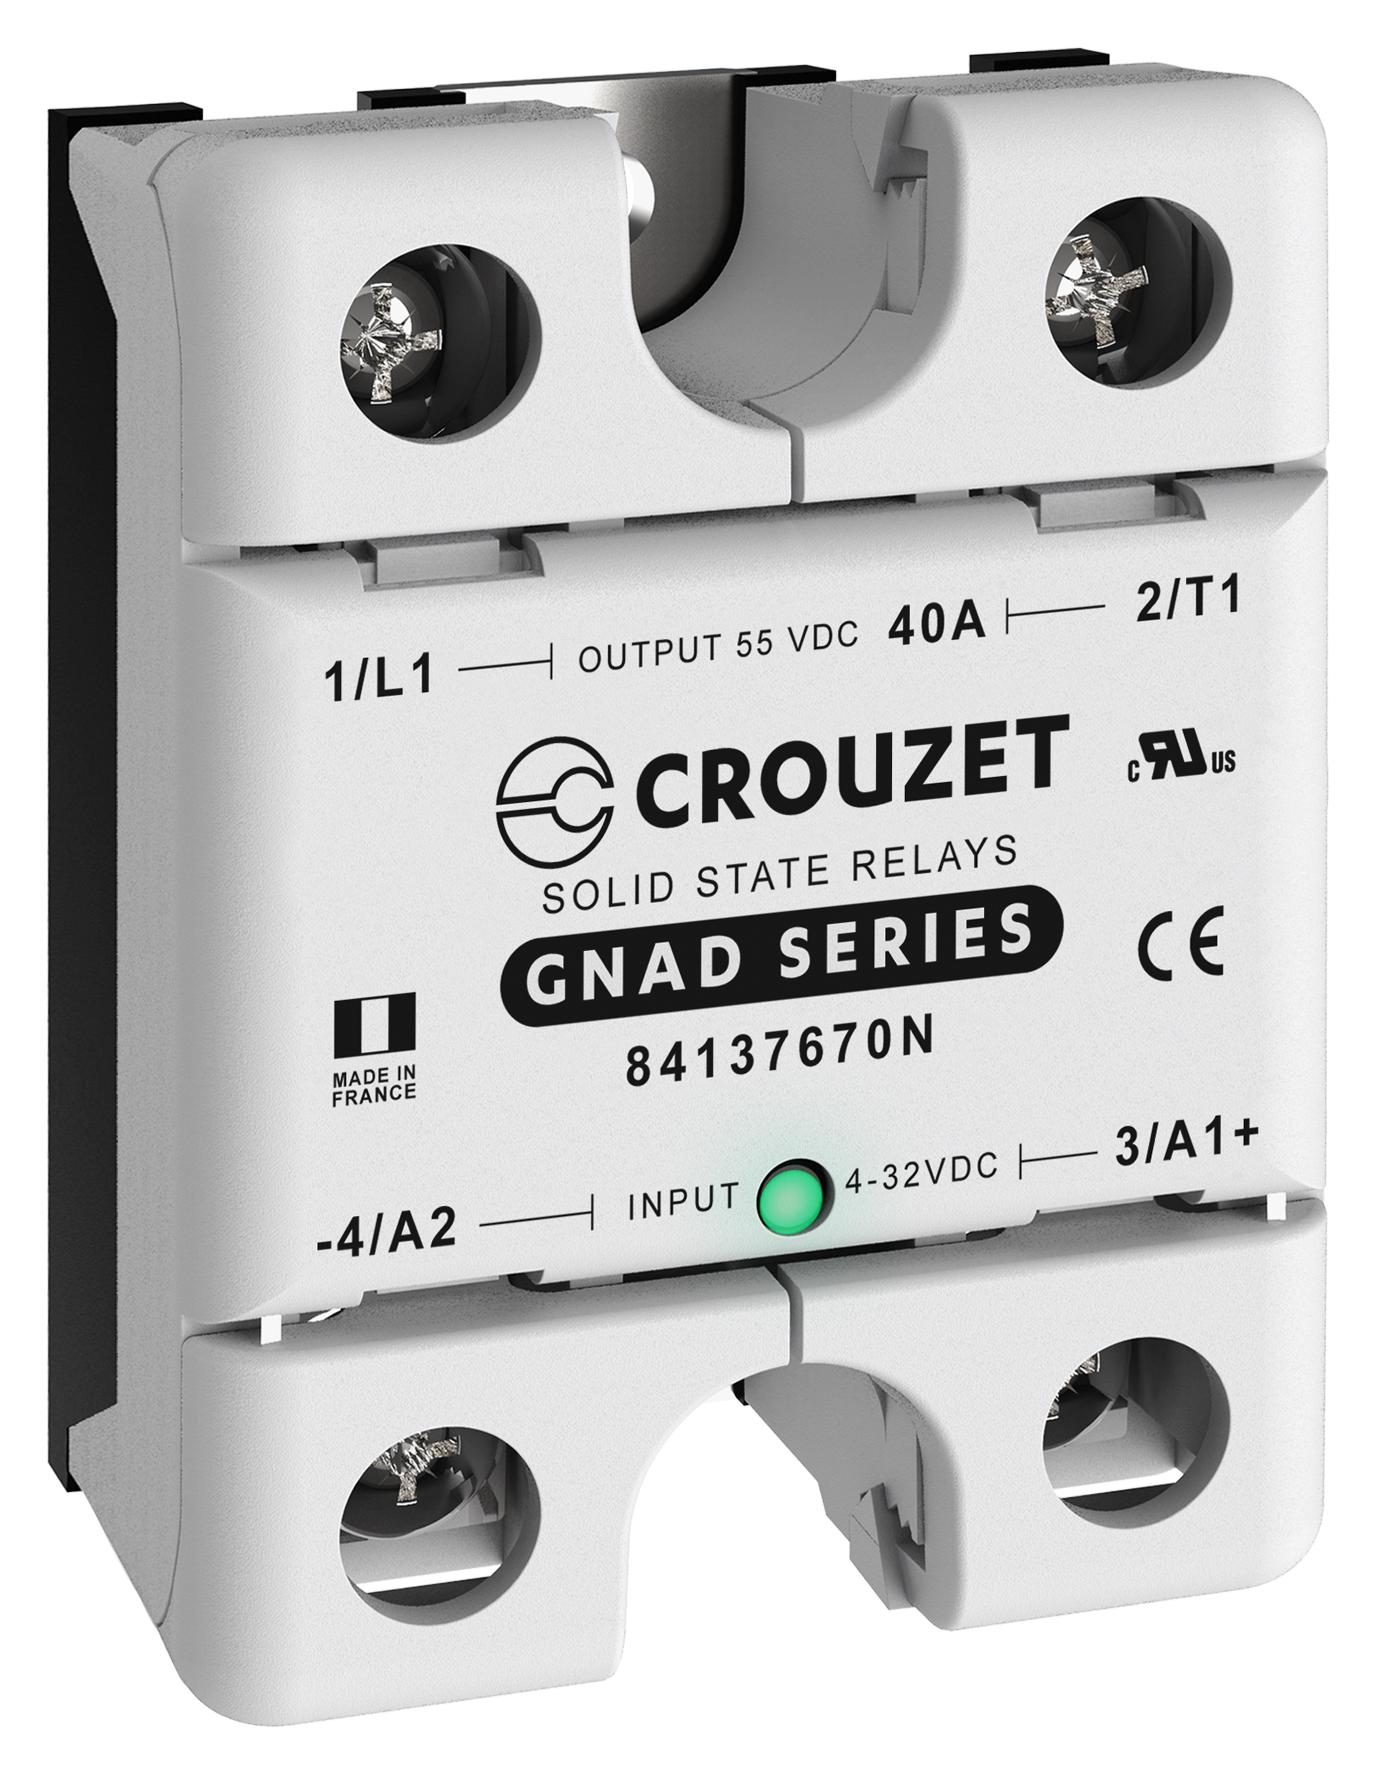 84137670N SOLID STATE RELAY, 40A, 5-55VDC, PANEL CROUZET